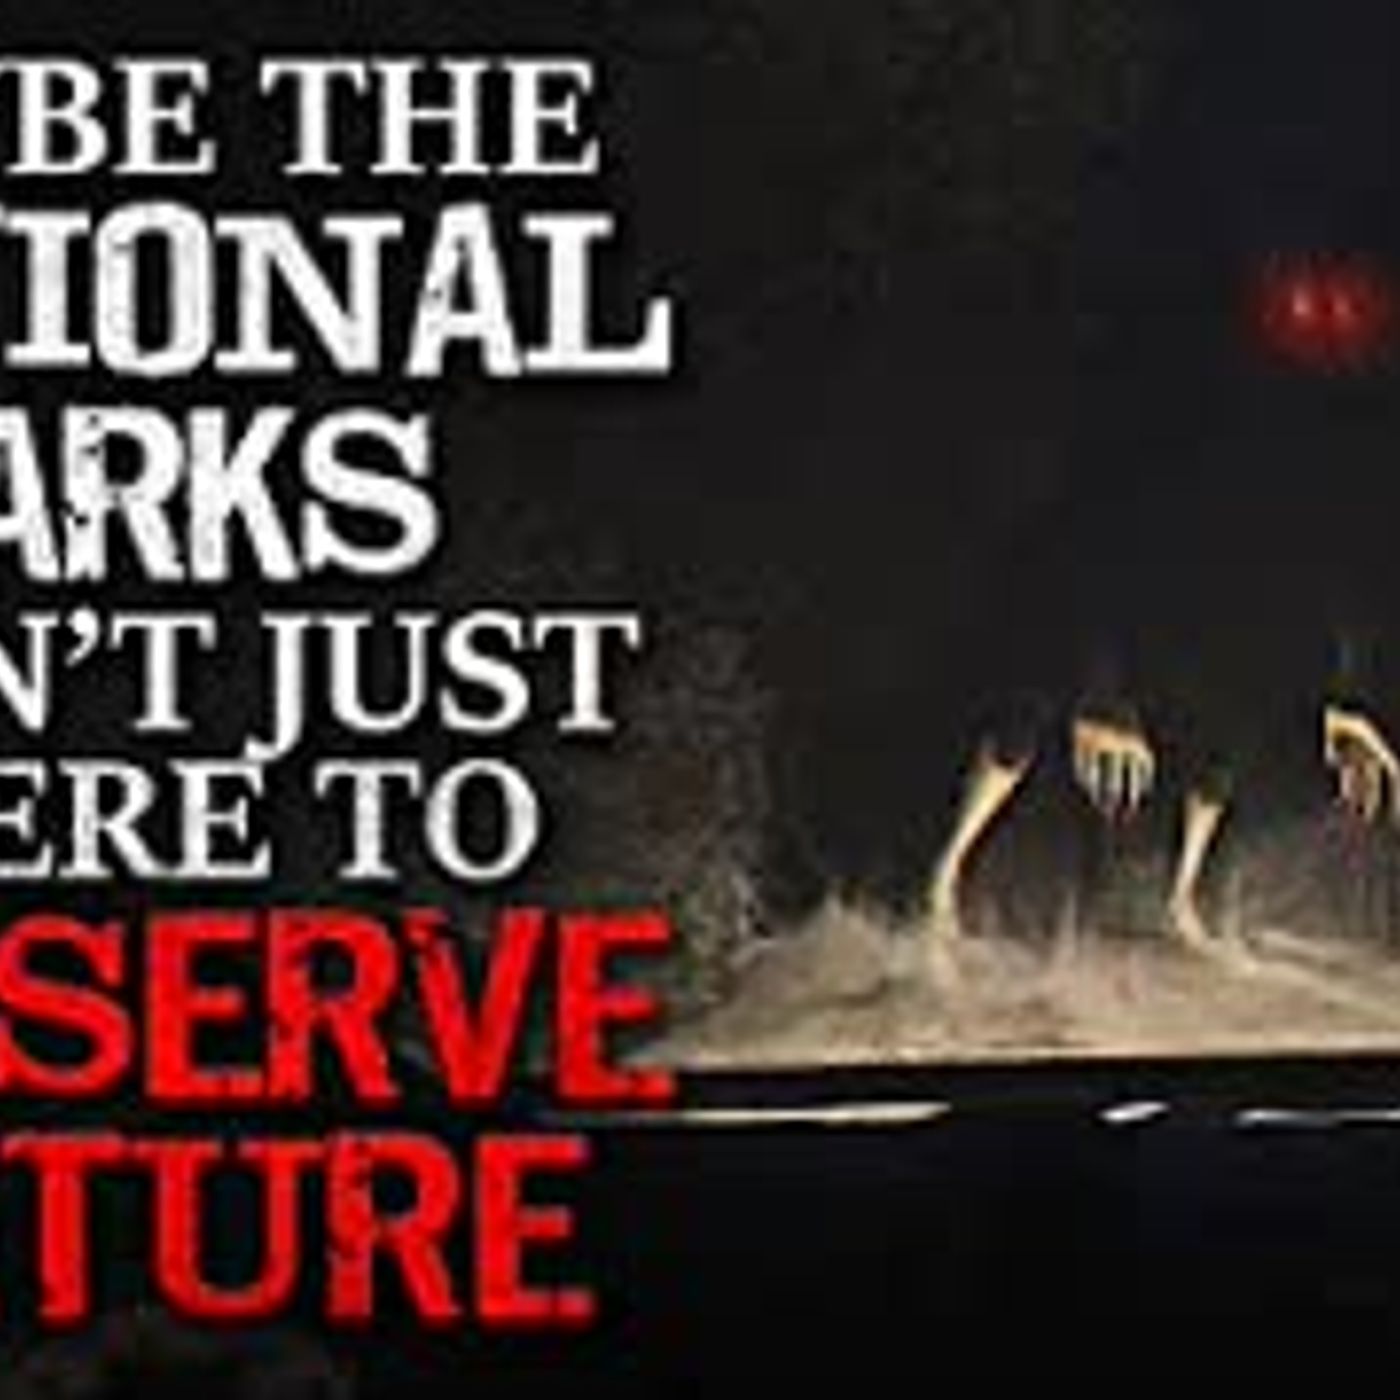 ”Maybe the National Parks Aren’t Just There to Preserve Nature” Creepypasta